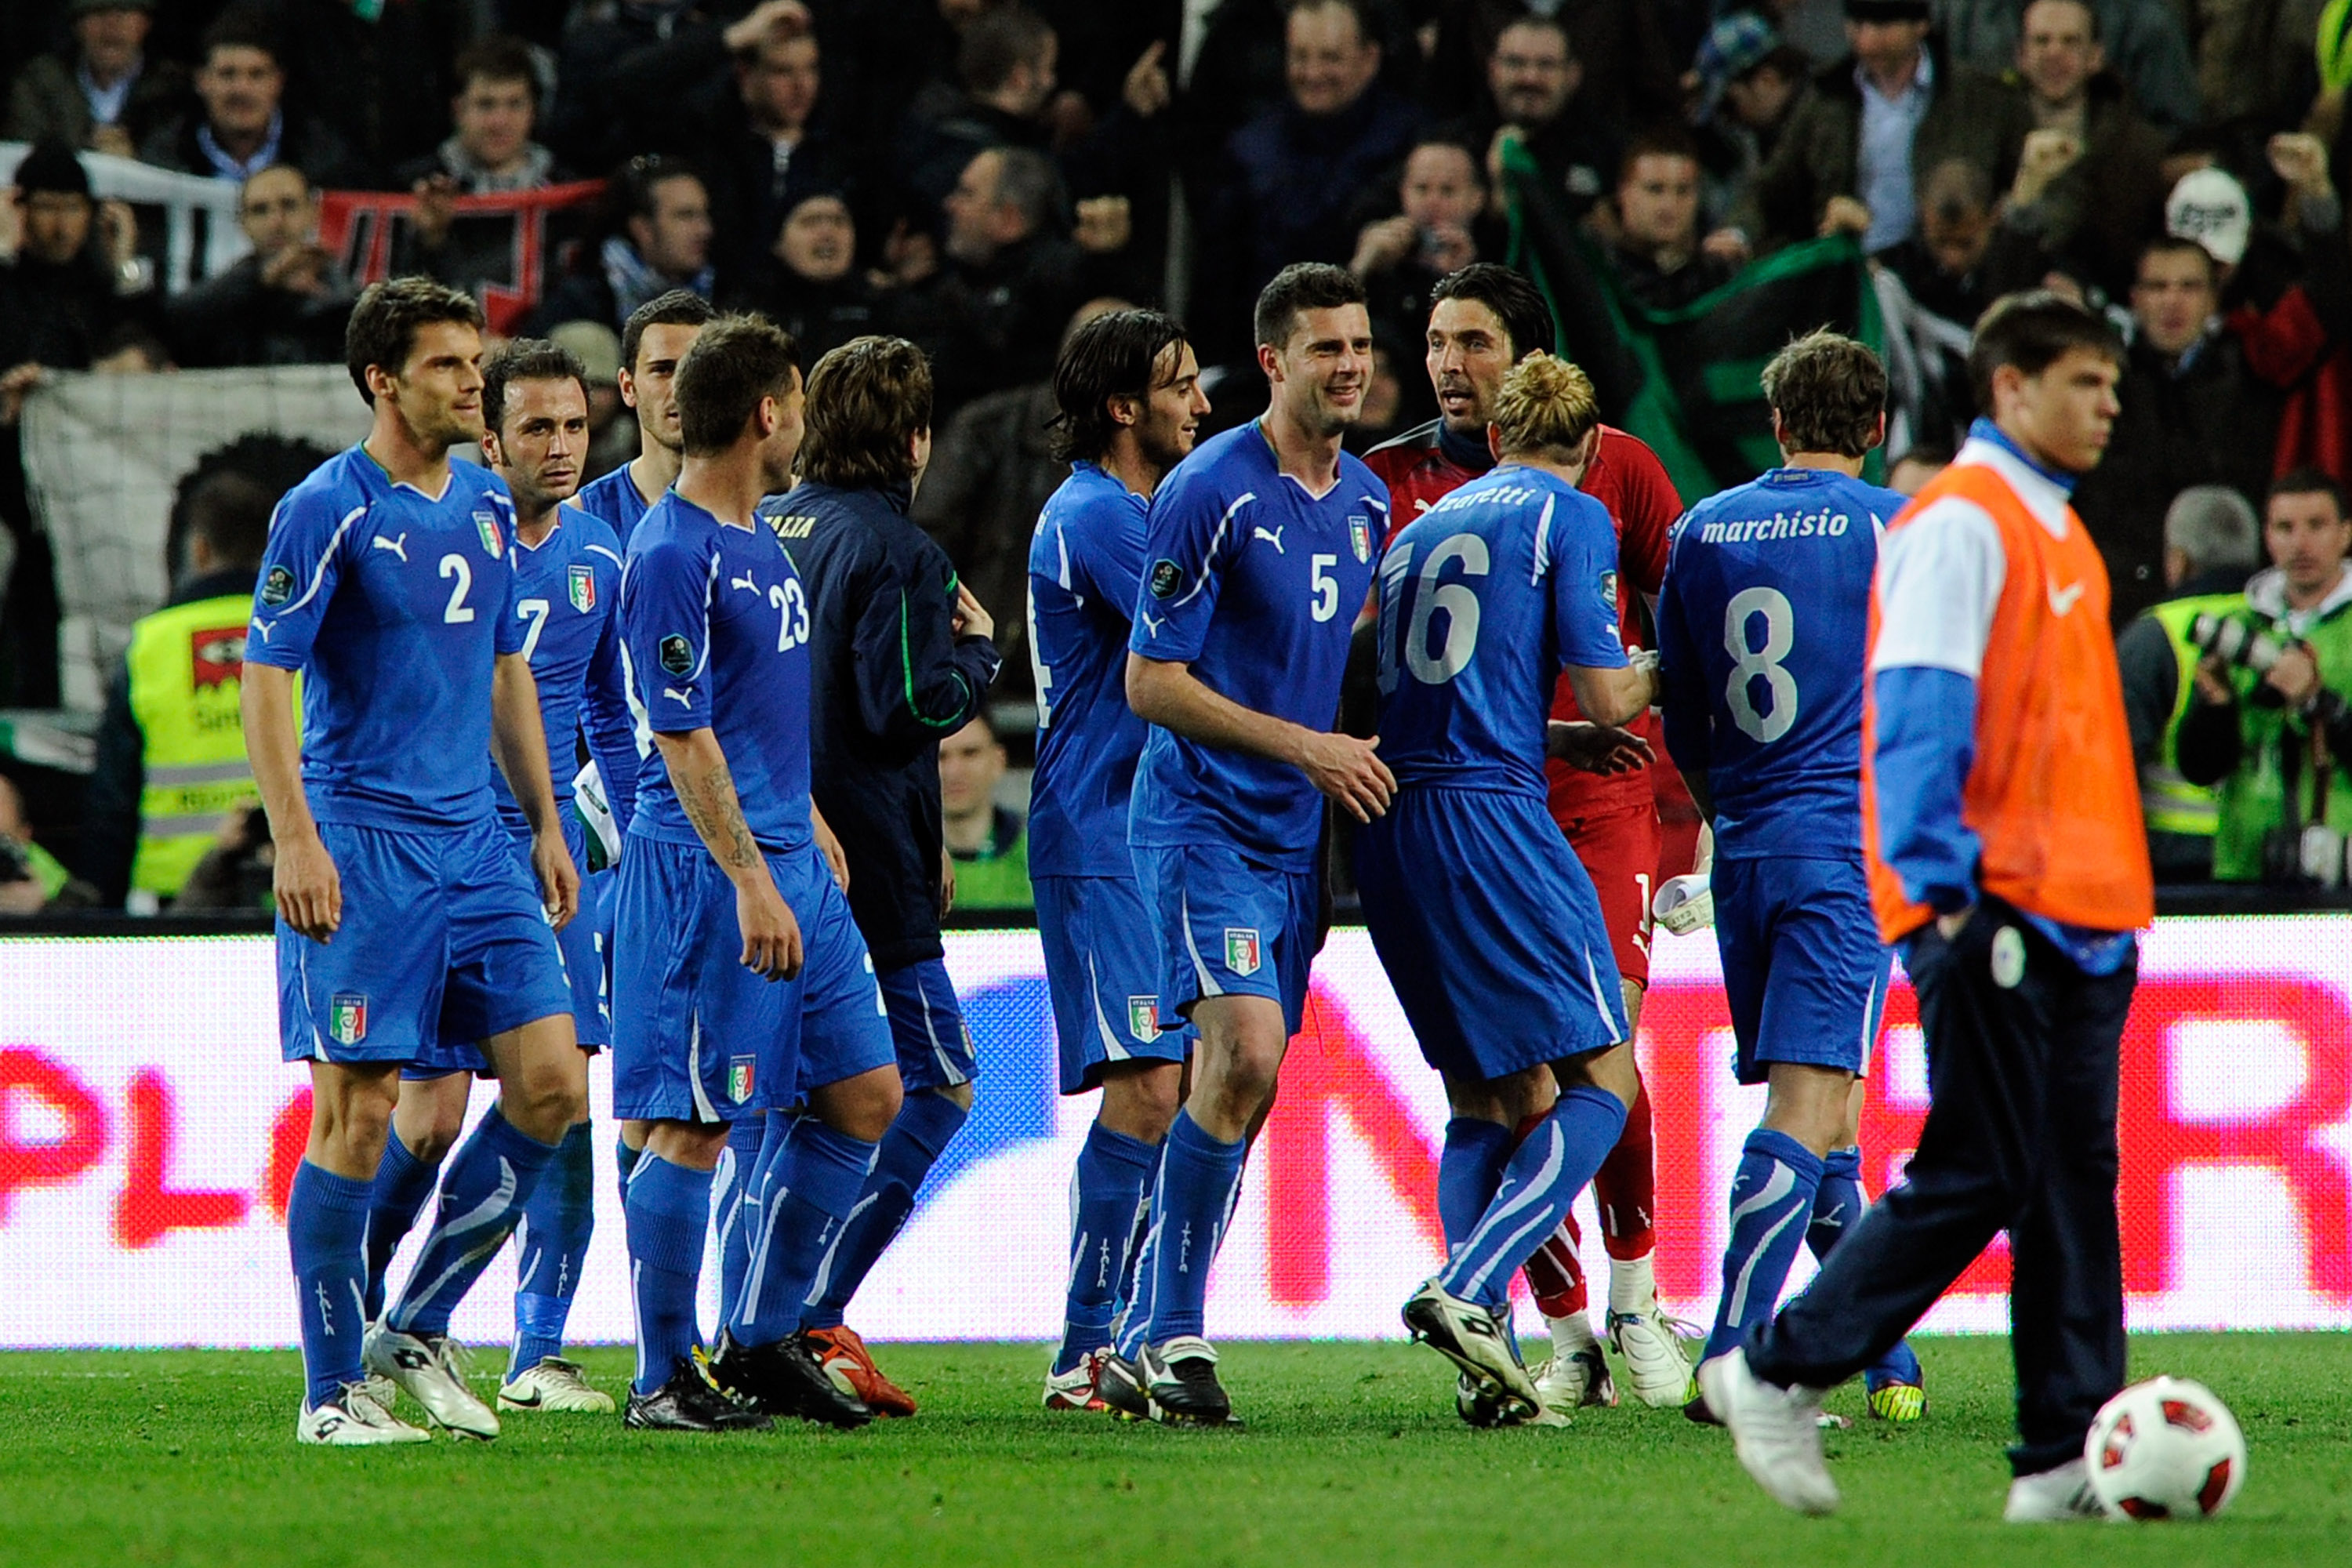 LJUBLJANA, SLOVENIA - MARCH 25:  Players of Italy celebrate during the UEFA EURO 2012 qualifier between Slovenia and Italy on March 25, 2011 in Ljubljana, Slovenia.  (Photo by Claudio Villa/Getty Images)